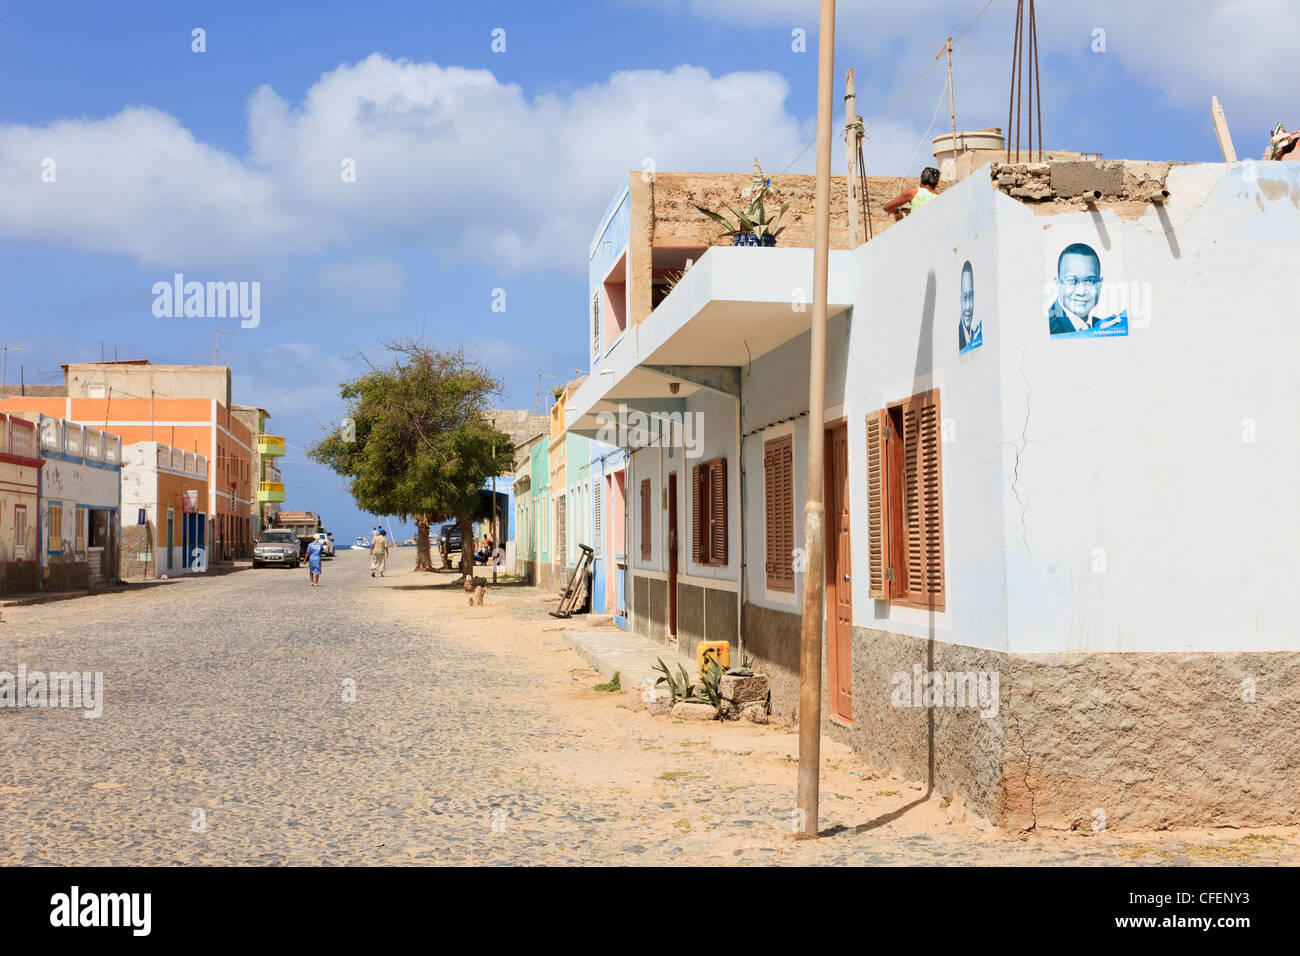 Typical street scene with colonial houses along the cobbled road in the capital city. Sal Rei, Boa Vista, Cape Verde Islands. Stock Photo